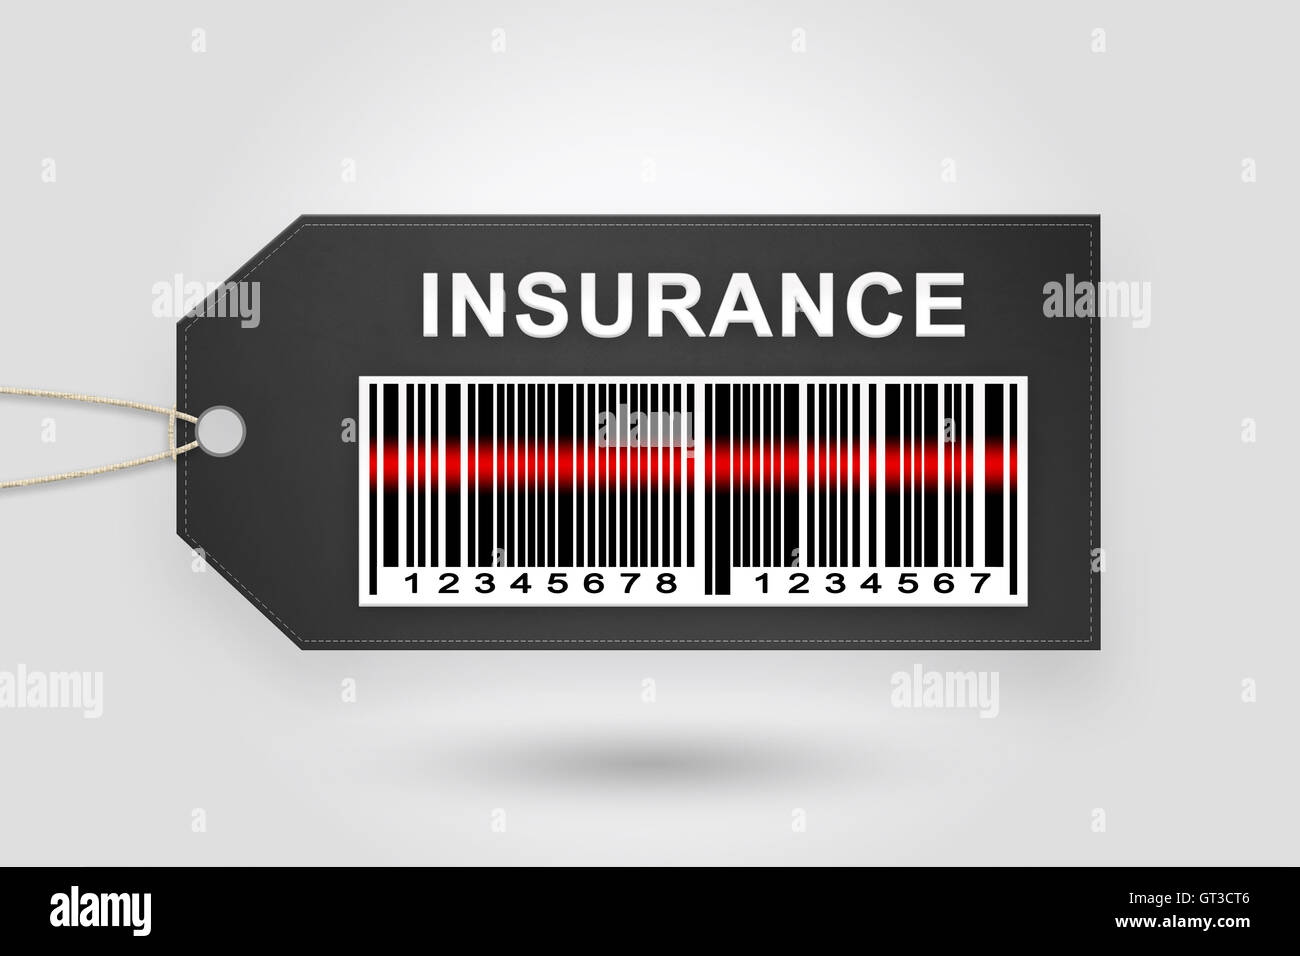 insurance price tag with barcode and grey radial gradient background Stock Photo